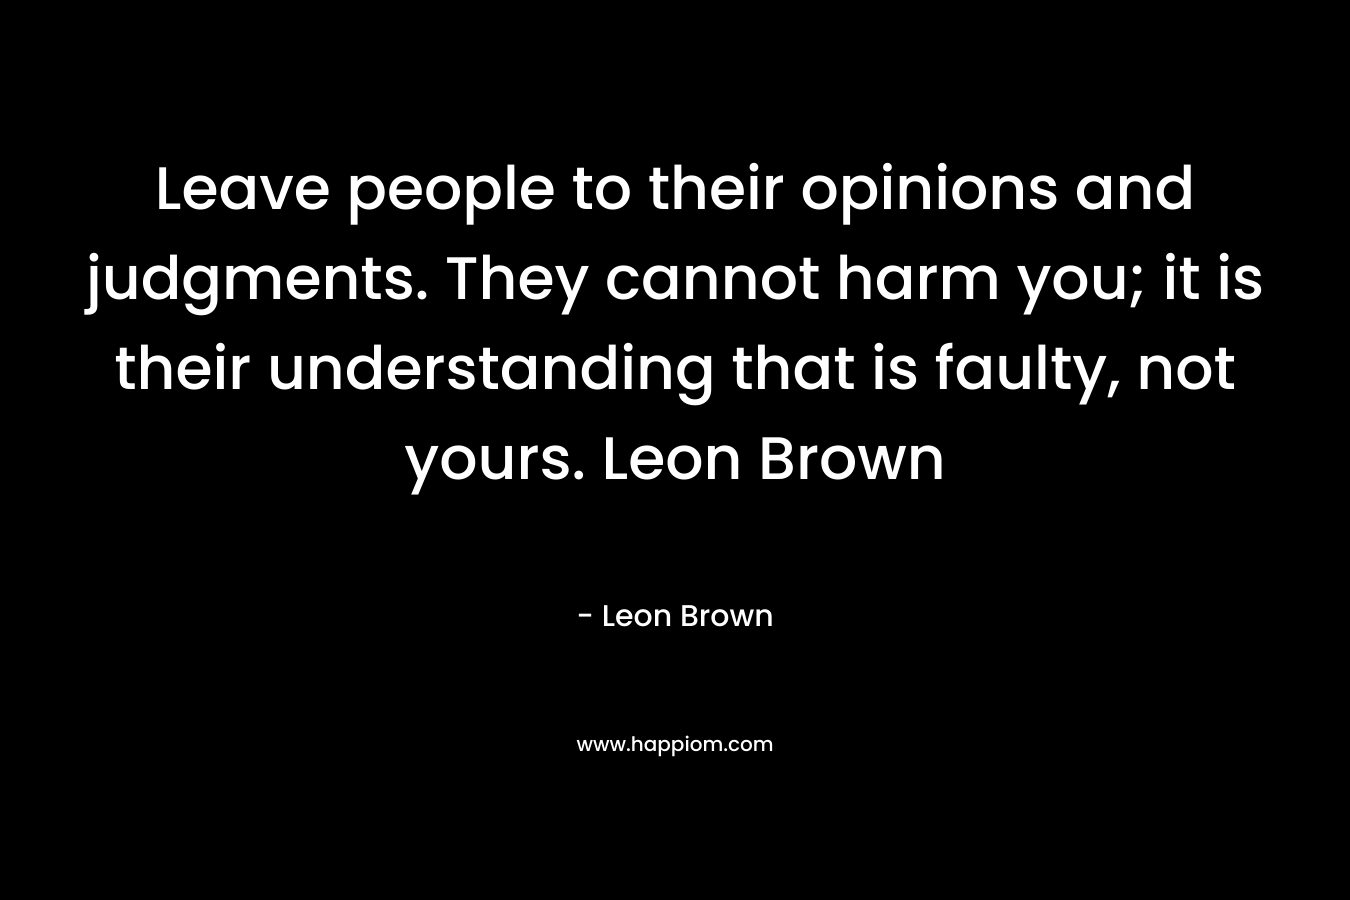 Leave people to their opinions and judgments. They cannot harm you; it is their understanding that is faulty, not yours. Leon Brown